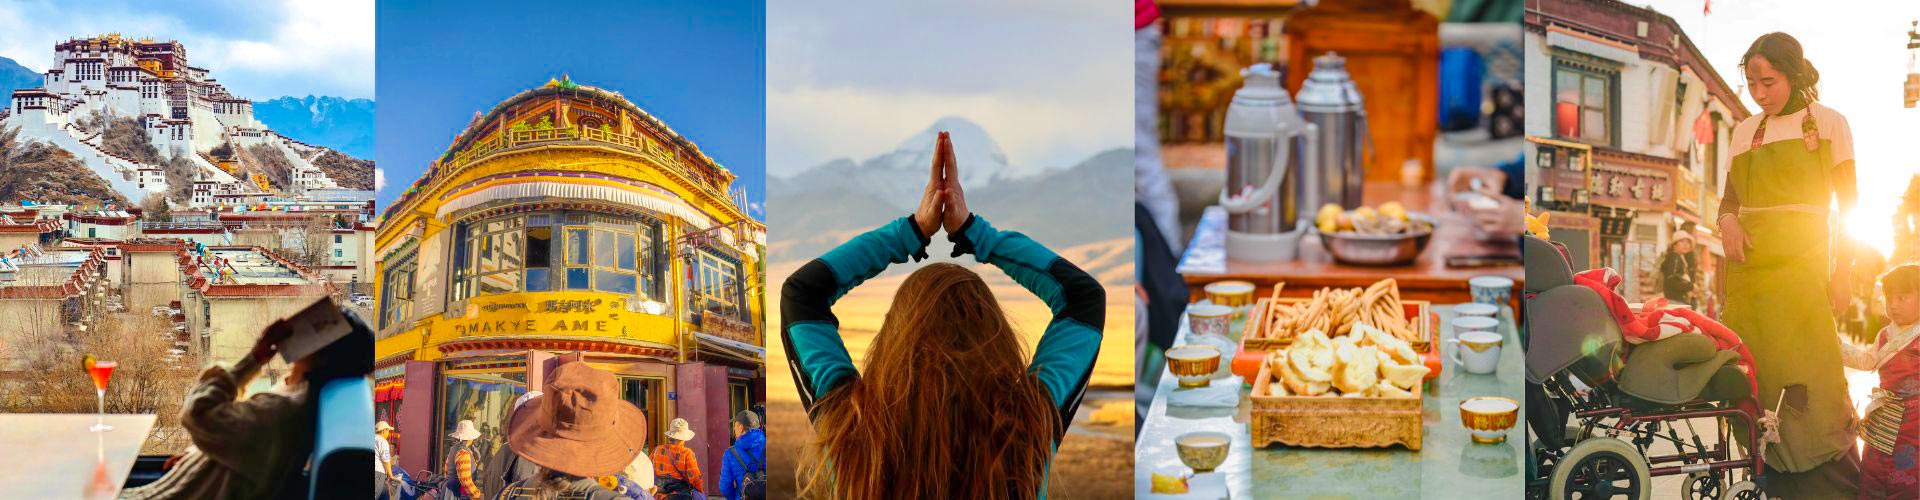 Tibet Winter Tours - Tibet Winter Vacation & Holiday at LOWEST PRICE